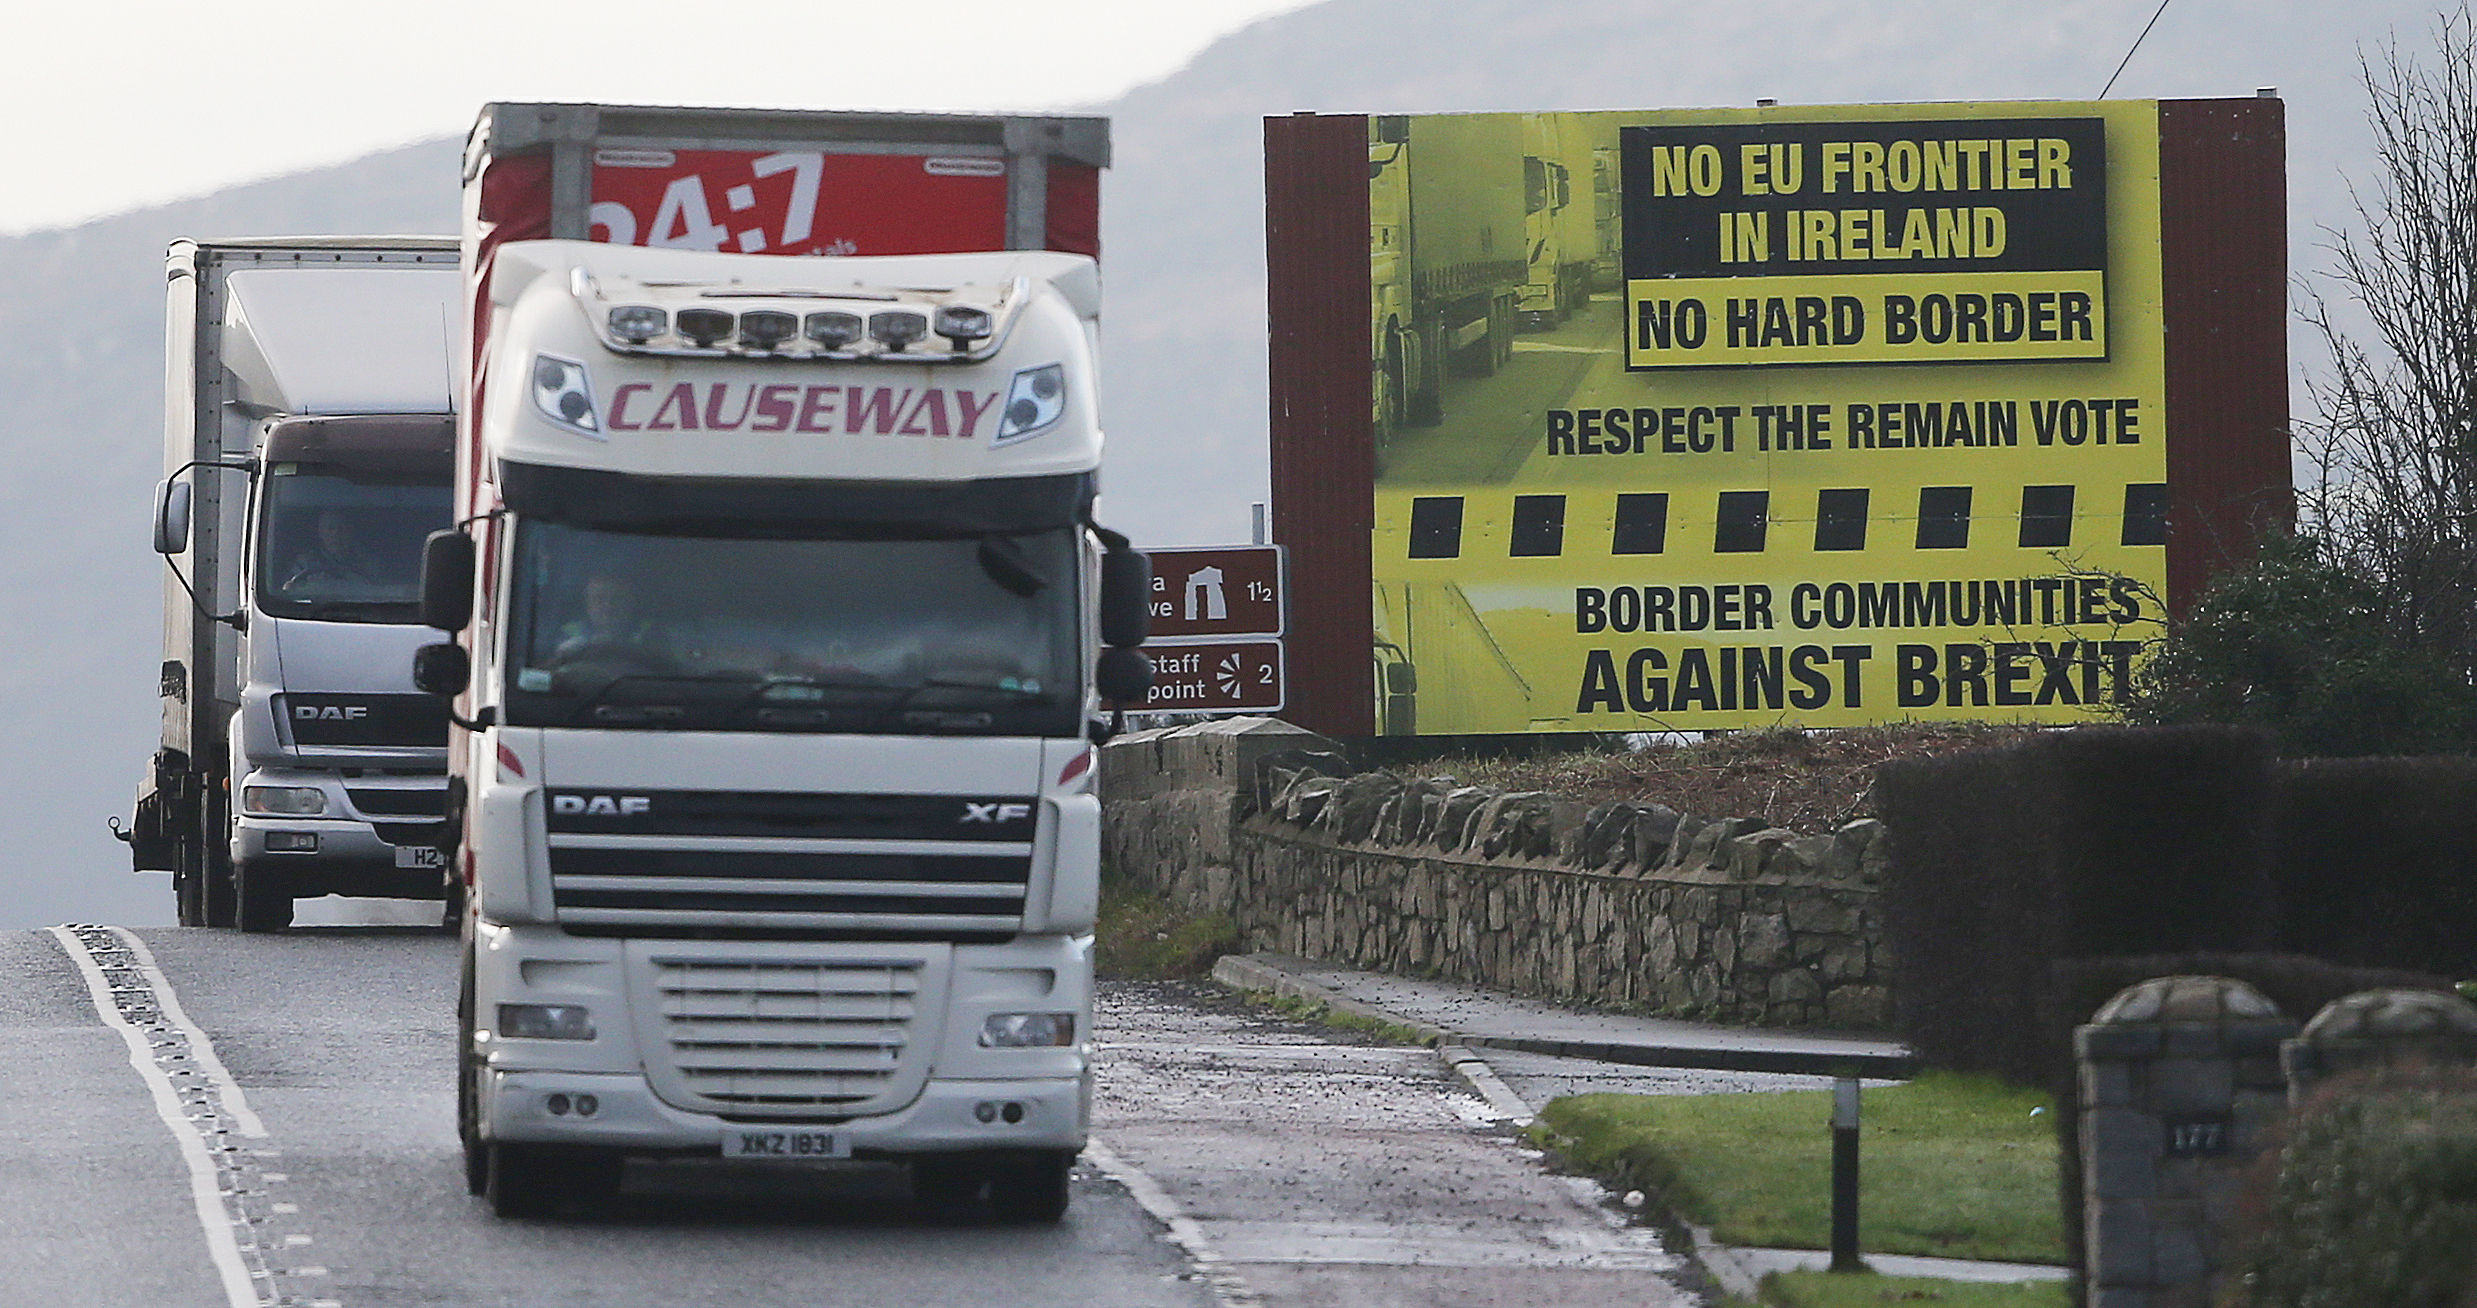 A truck passes a Brexit billboard in Jonesborough, Co. Armagh, on the northern side of the border between Northern Ireland and the Republic of Ireland, (Niall Carson/PA Wire)